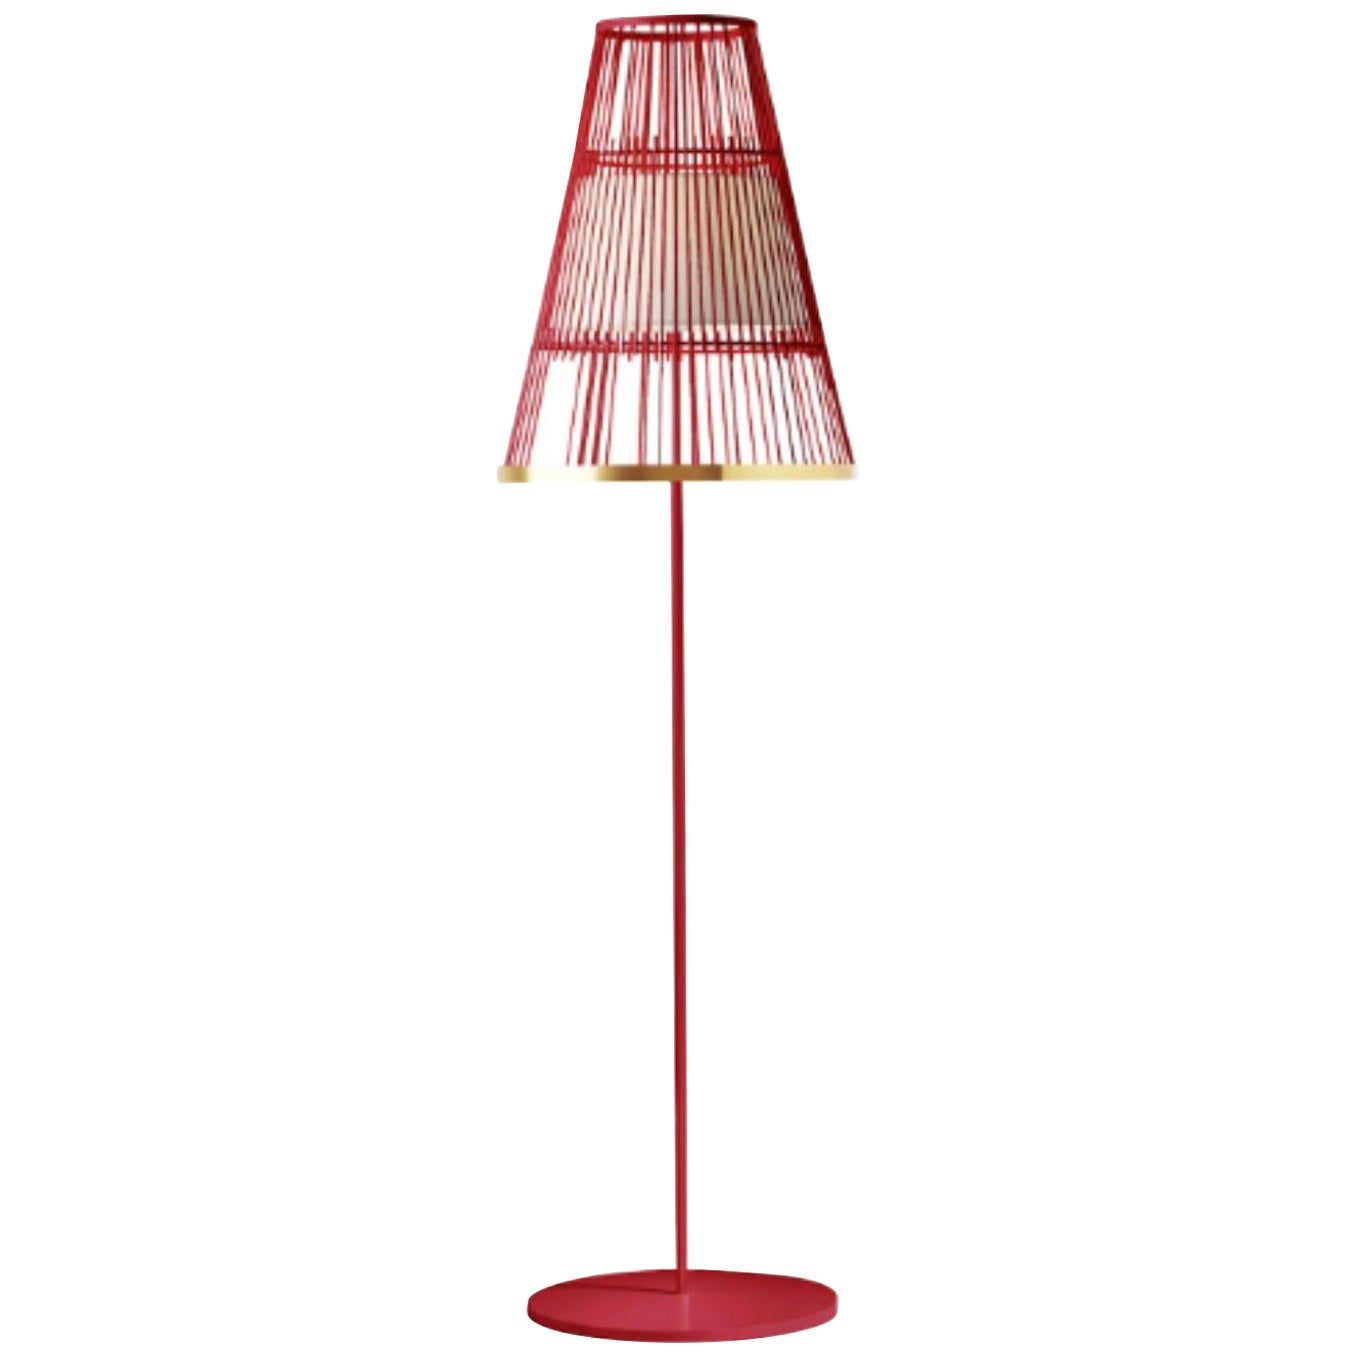 Lipstick Up Floor Lamp with Brass Ring by Dooq